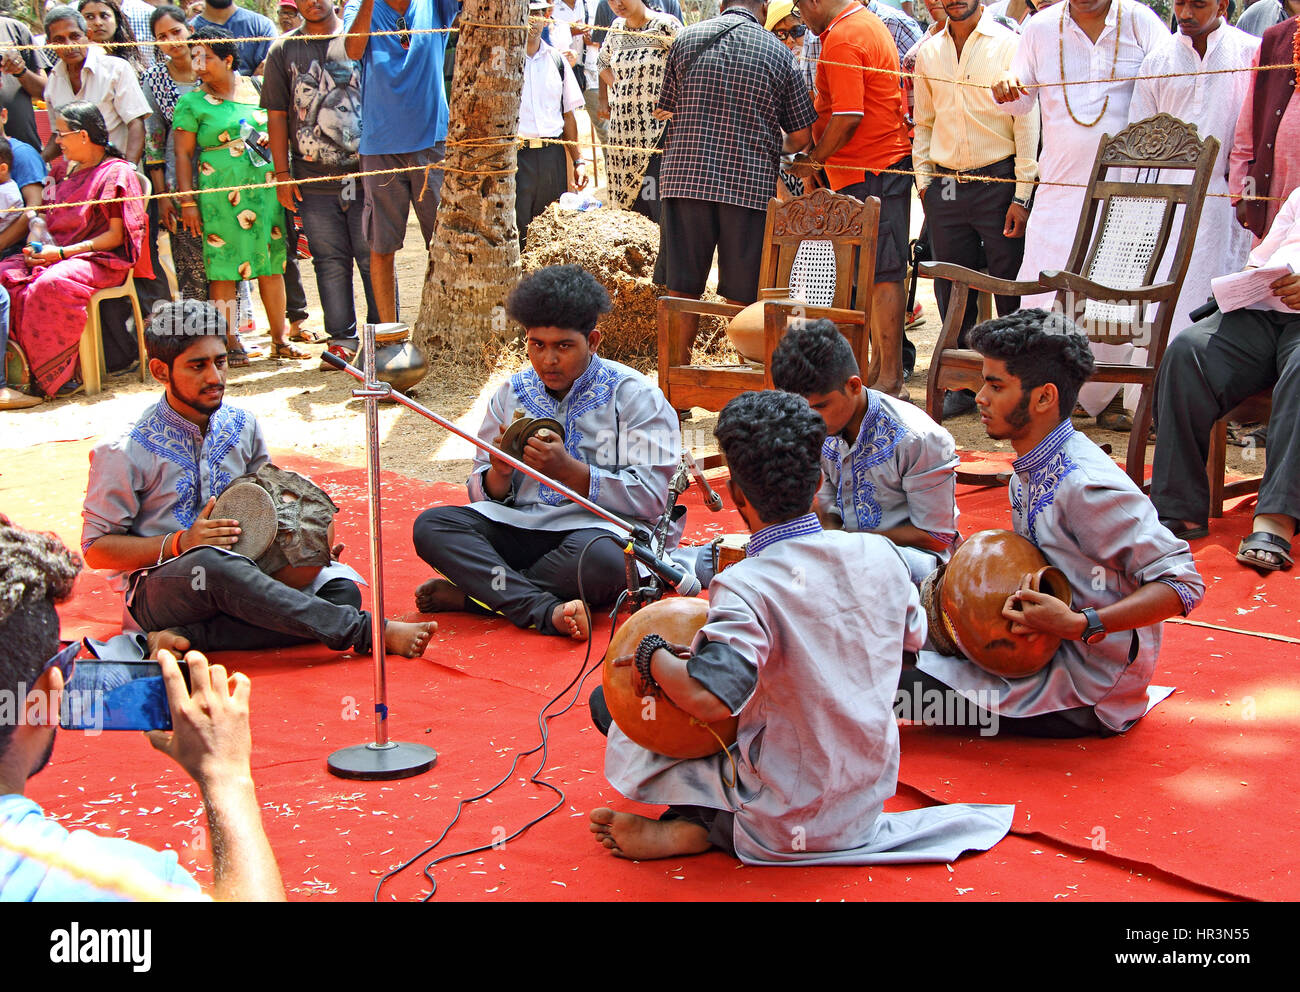 Siridao Beach, Goa, India. 26th February, 2017. Troupe of boys perform traditional music at Ghumatachem Fest 2017, a festival to revive the musical instrument, Ghumat, a traditional percussion instrument of Goa, India. MathewJoseK/Alamy Live News Stock Photo